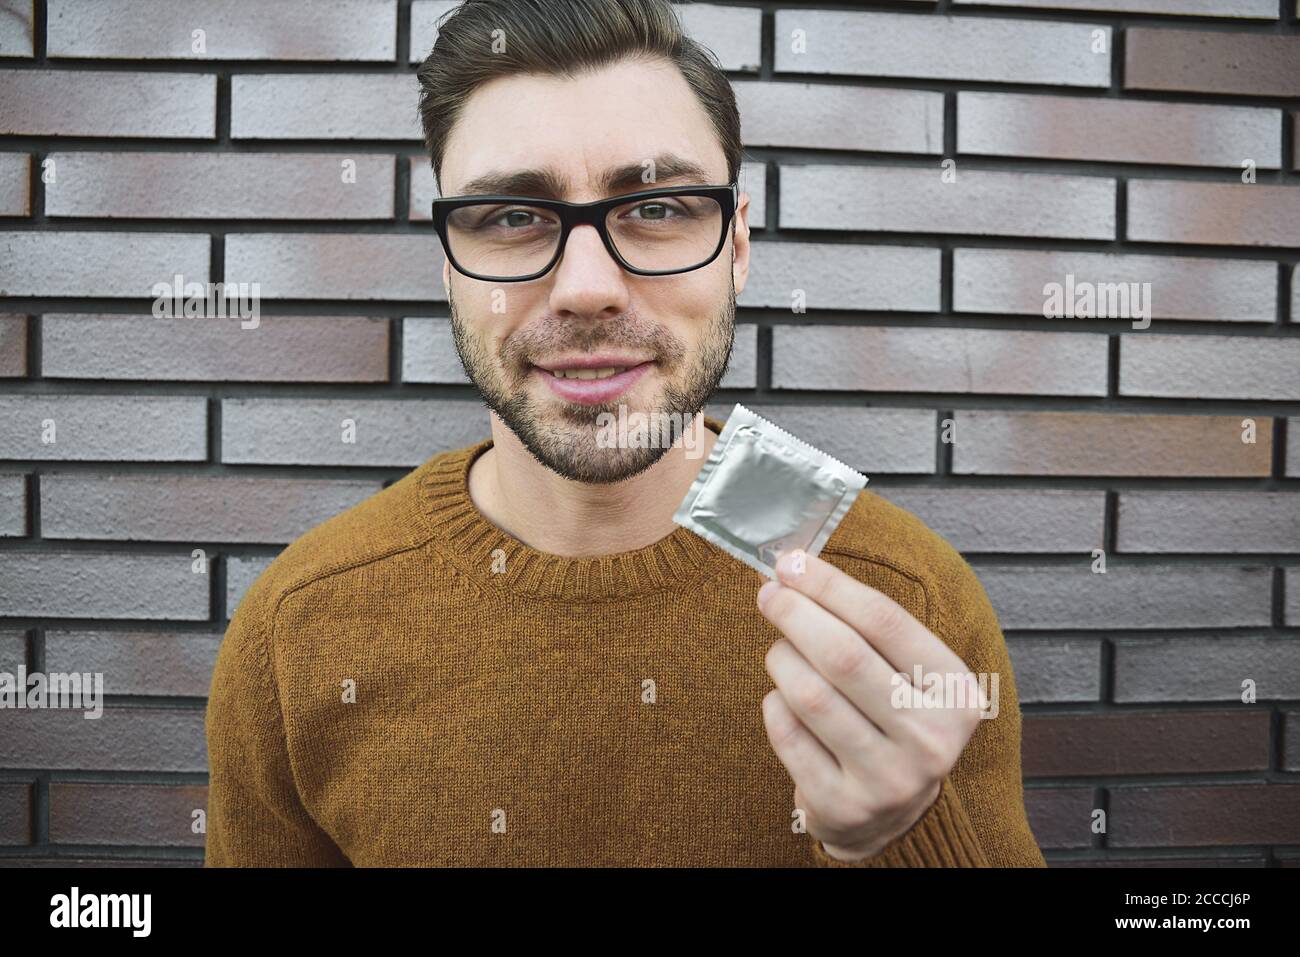 Male youngster with appealing look, holds condom. Stock Photo